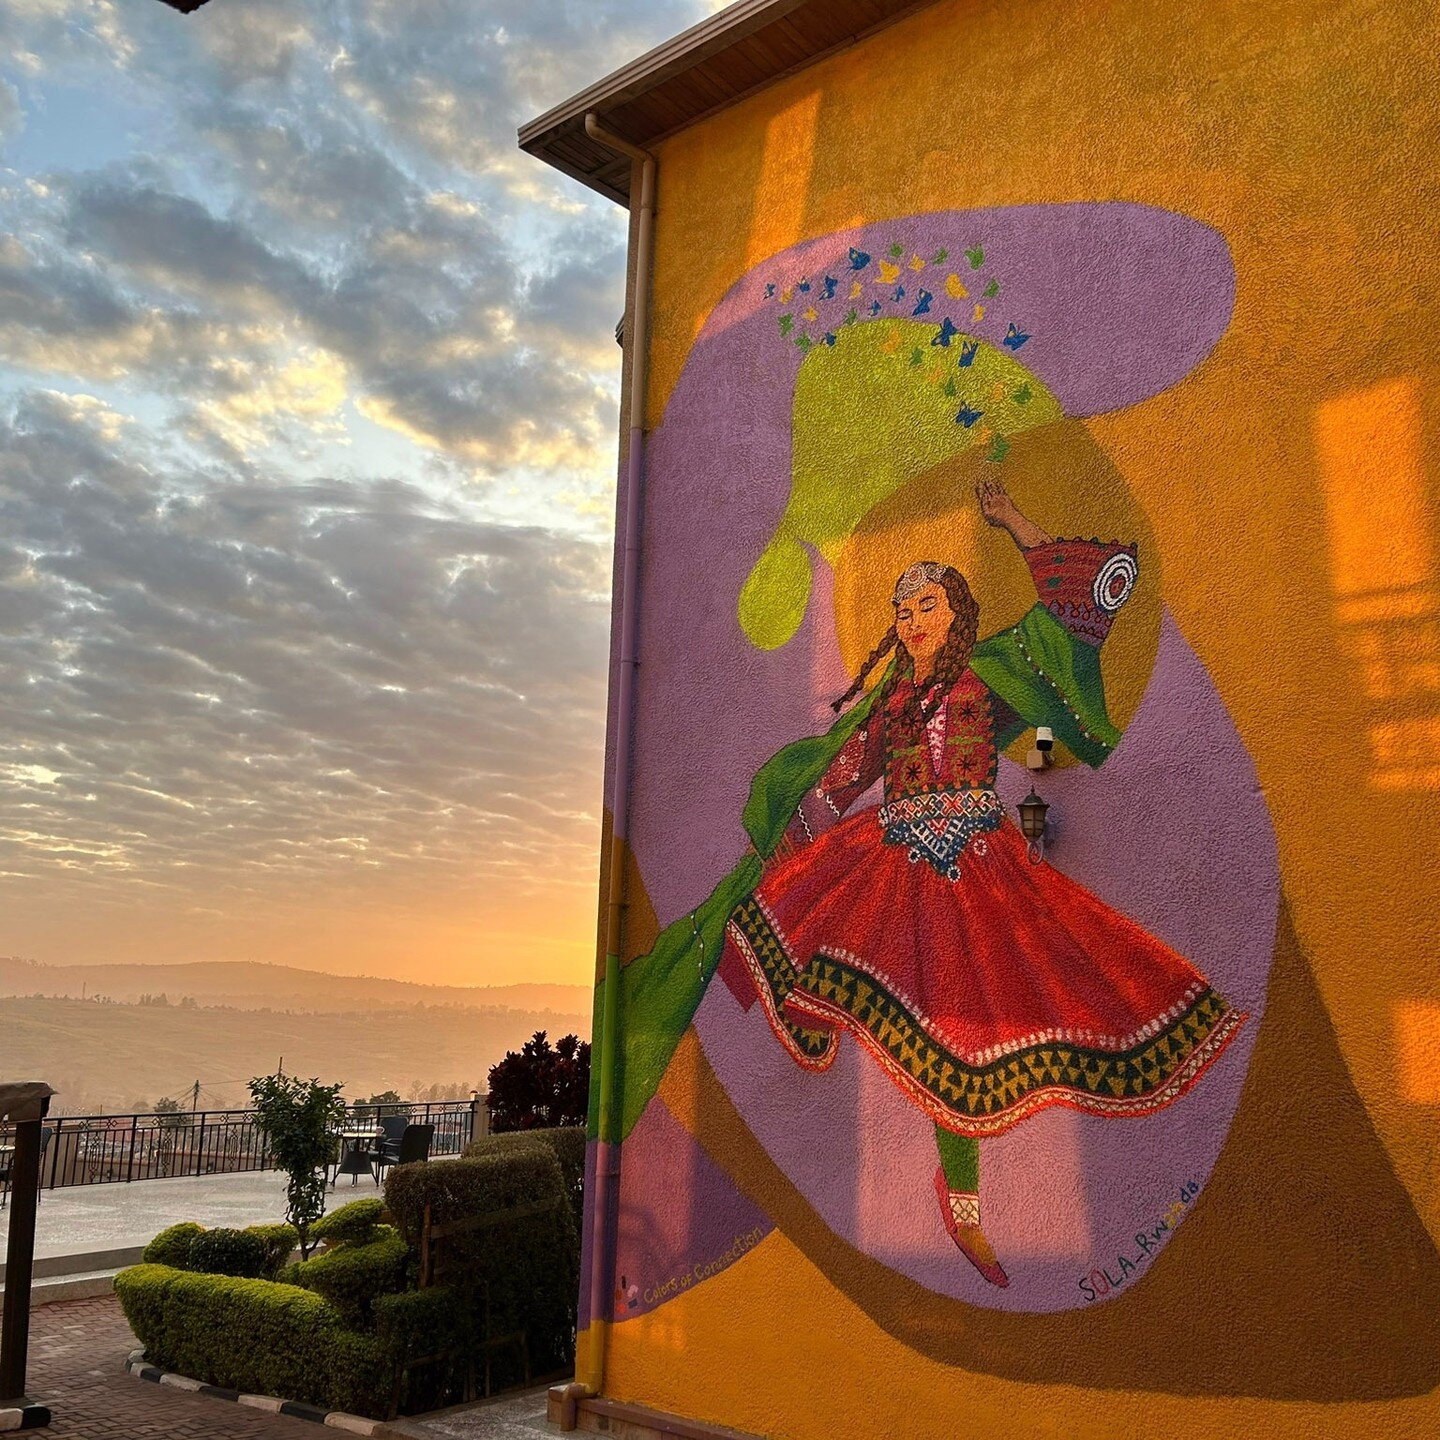 Sunrise 🌞 and sunset bring out different colors in this mural created with Afghan students @sola.afghanistan 

The Attan dance was chosen for the subject of the mural because it is the national dance of Afghanistan that girl participants know well a